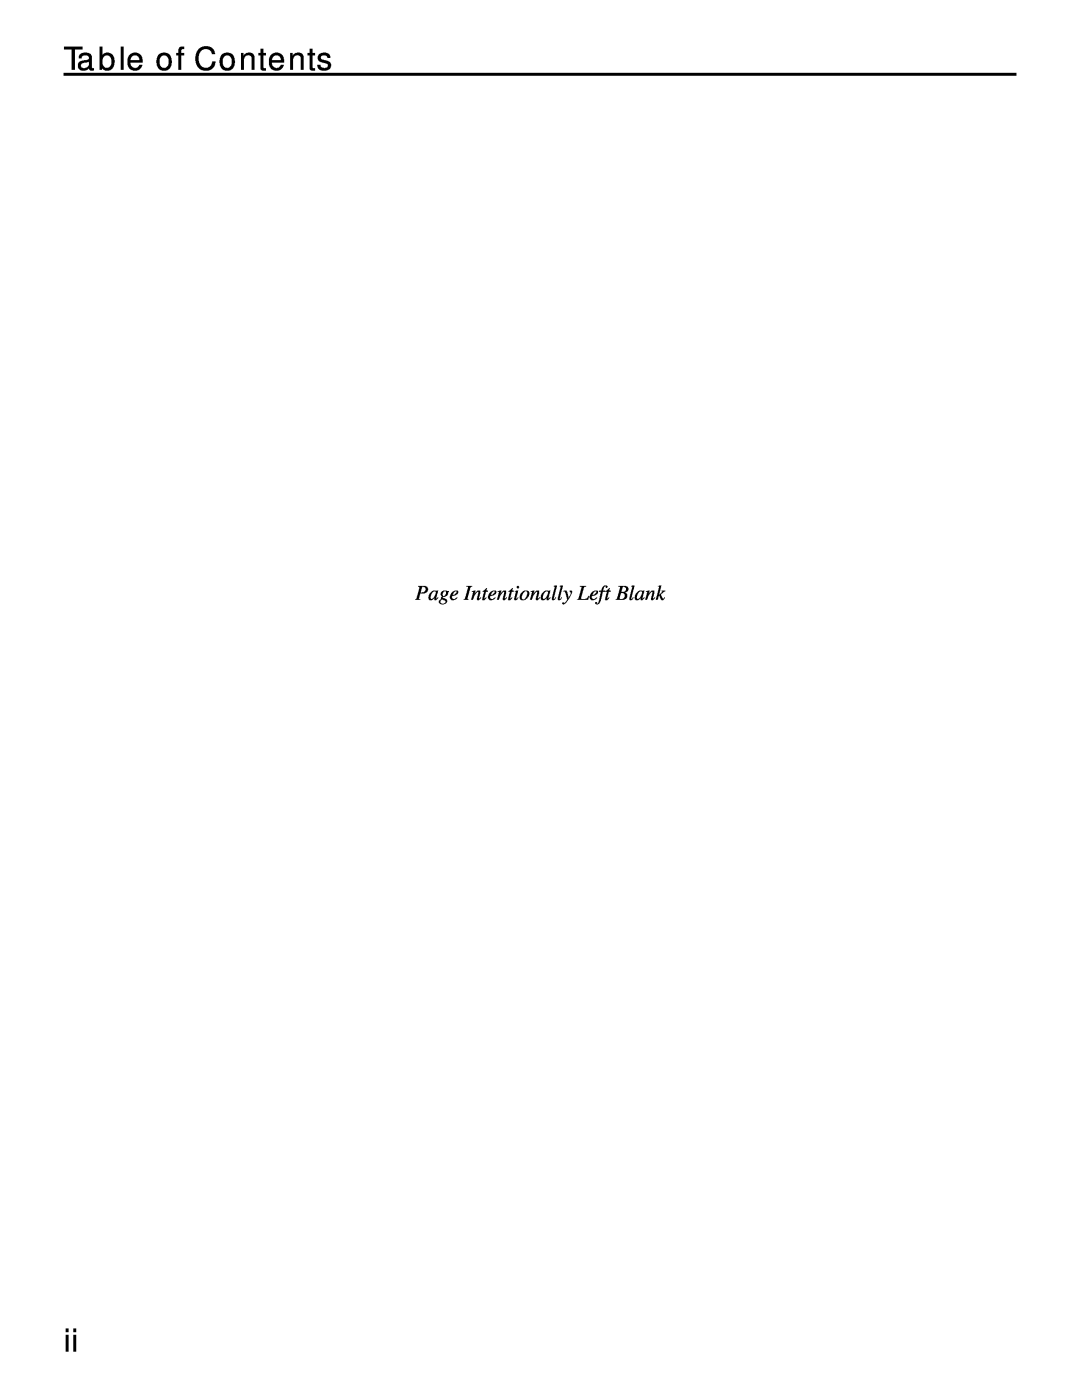 Manitowoc Ice Q 800 manual Table of Contents, Page Intentionally Left Blank 